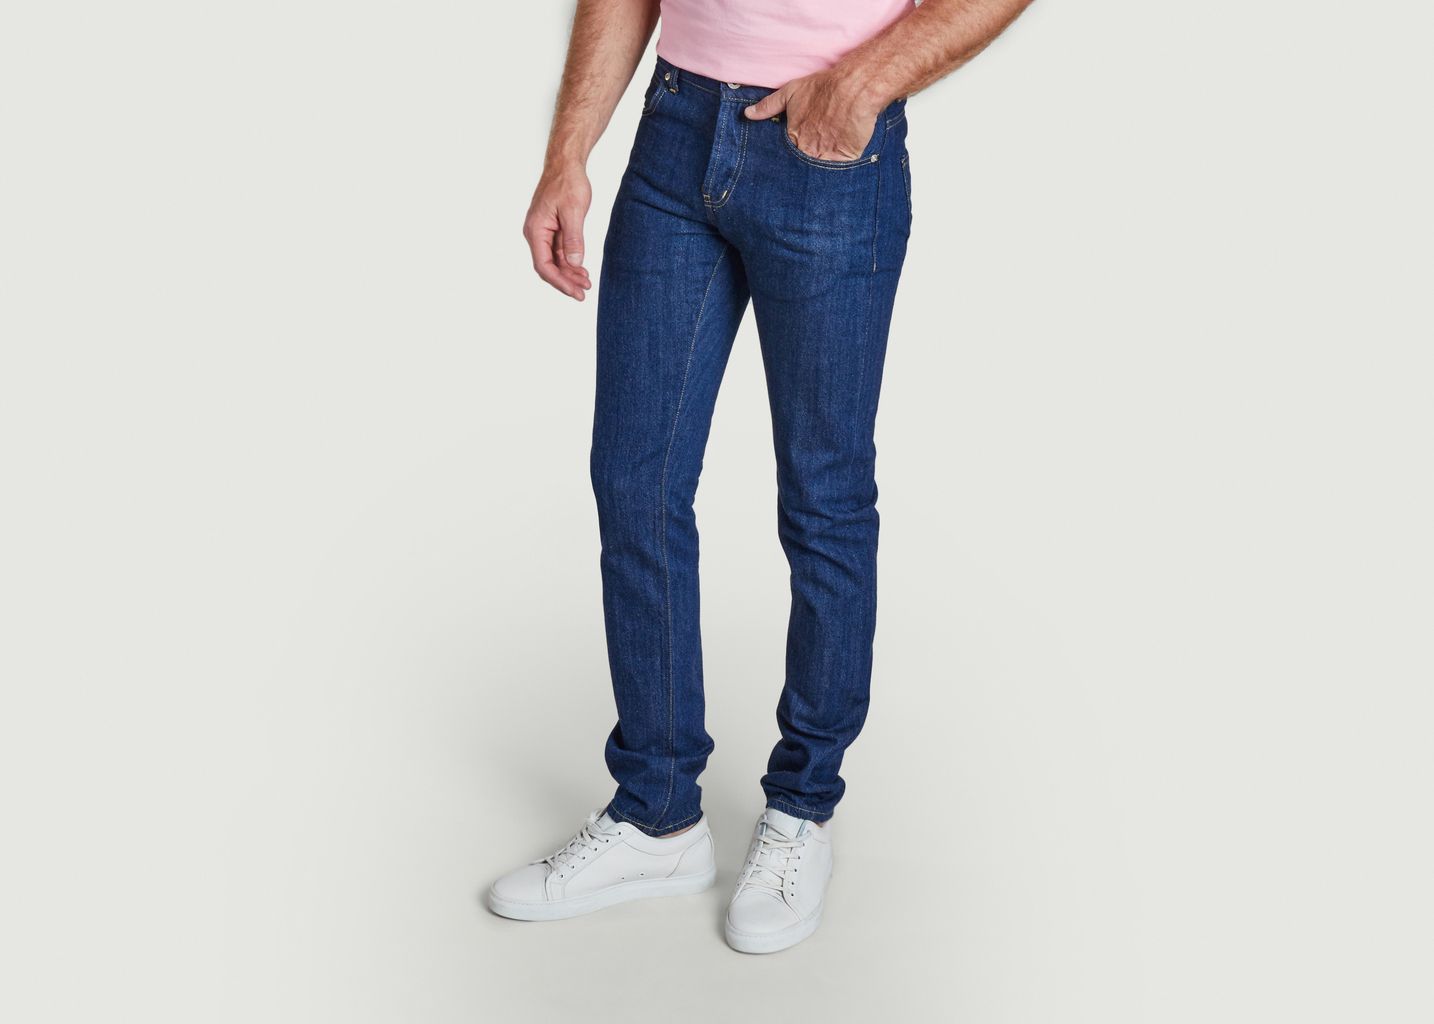 Jean New Frontier Selvedge Super Guy - Naked and Famous